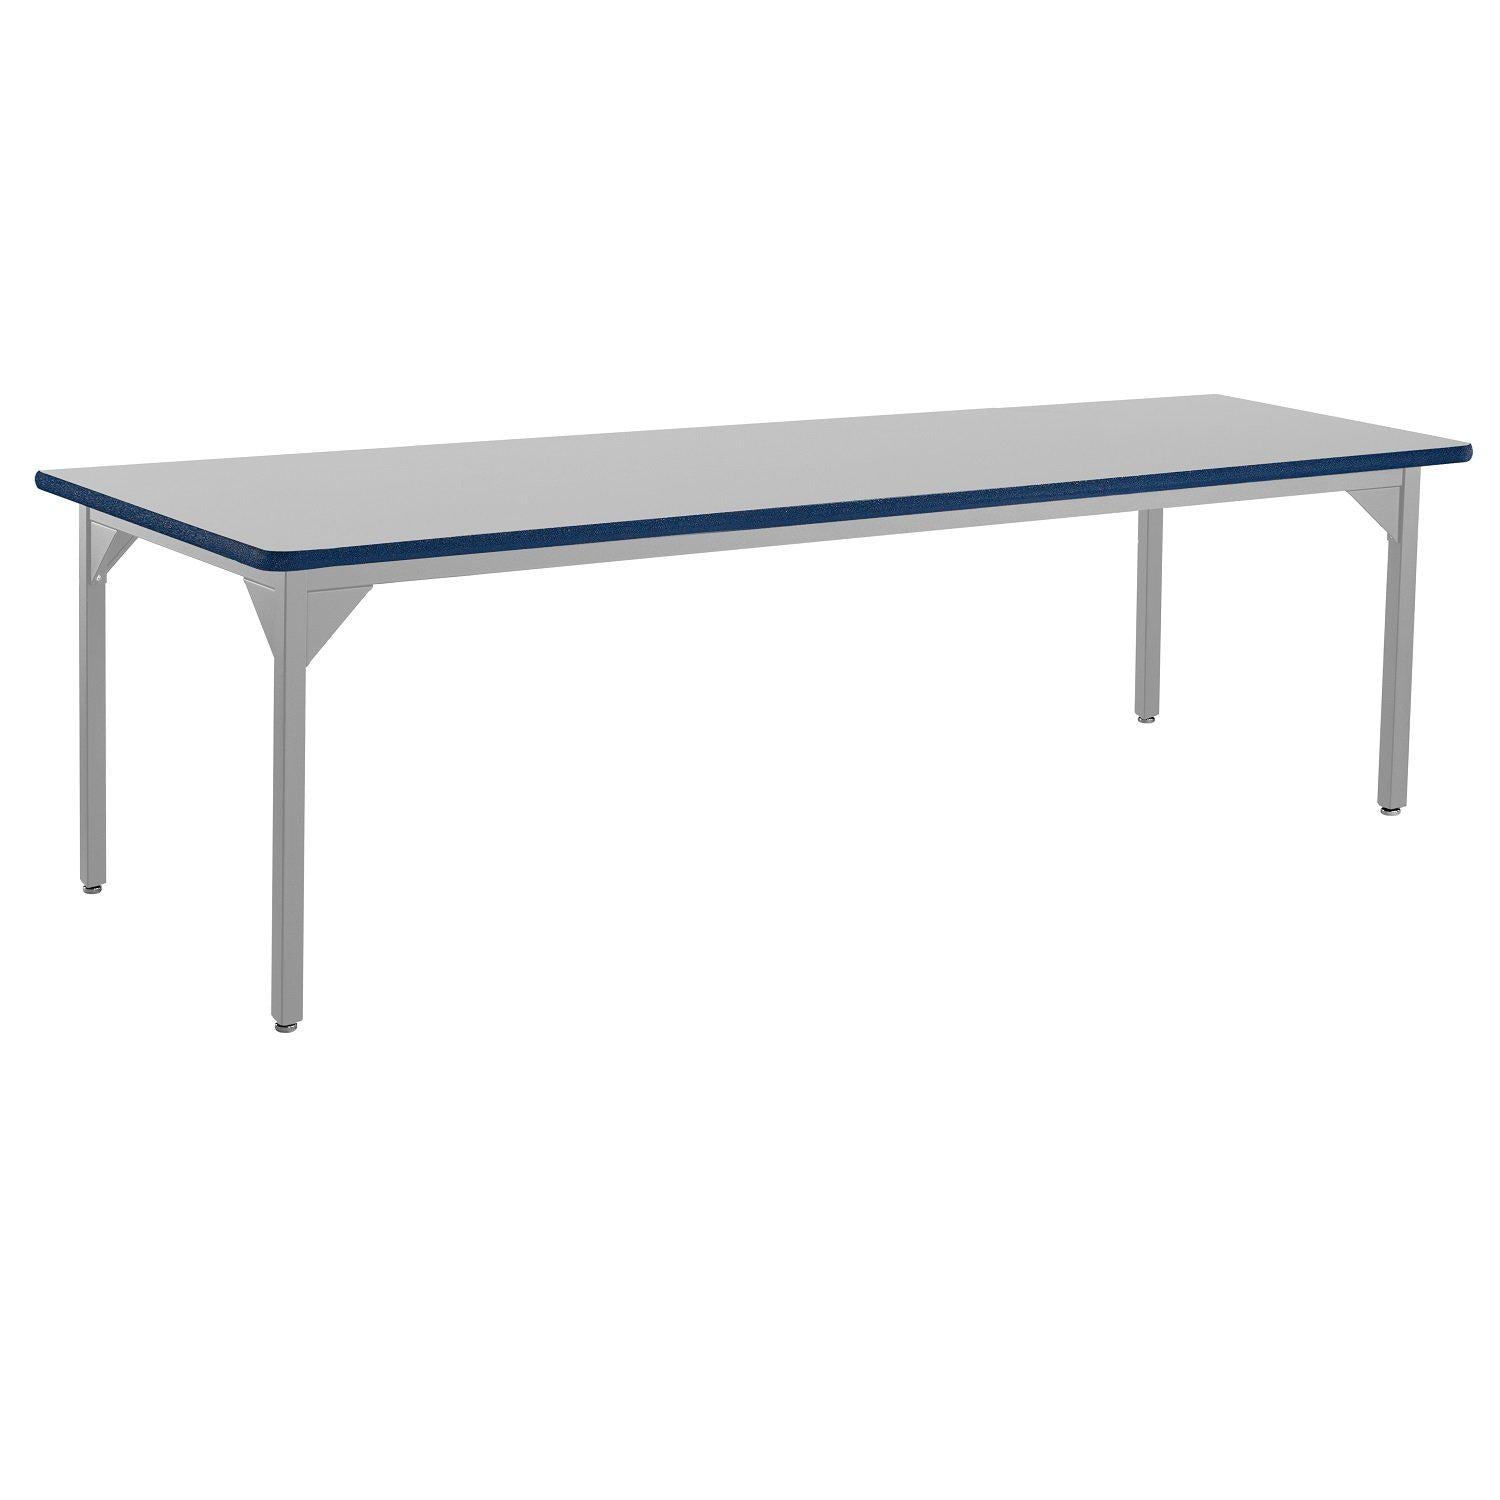 Heavy-Duty Fixed Height Utility Table, Soft Grey Frame, 48" x 72", Supreme High-Pressure Laminate Top with Black ProtectEdge